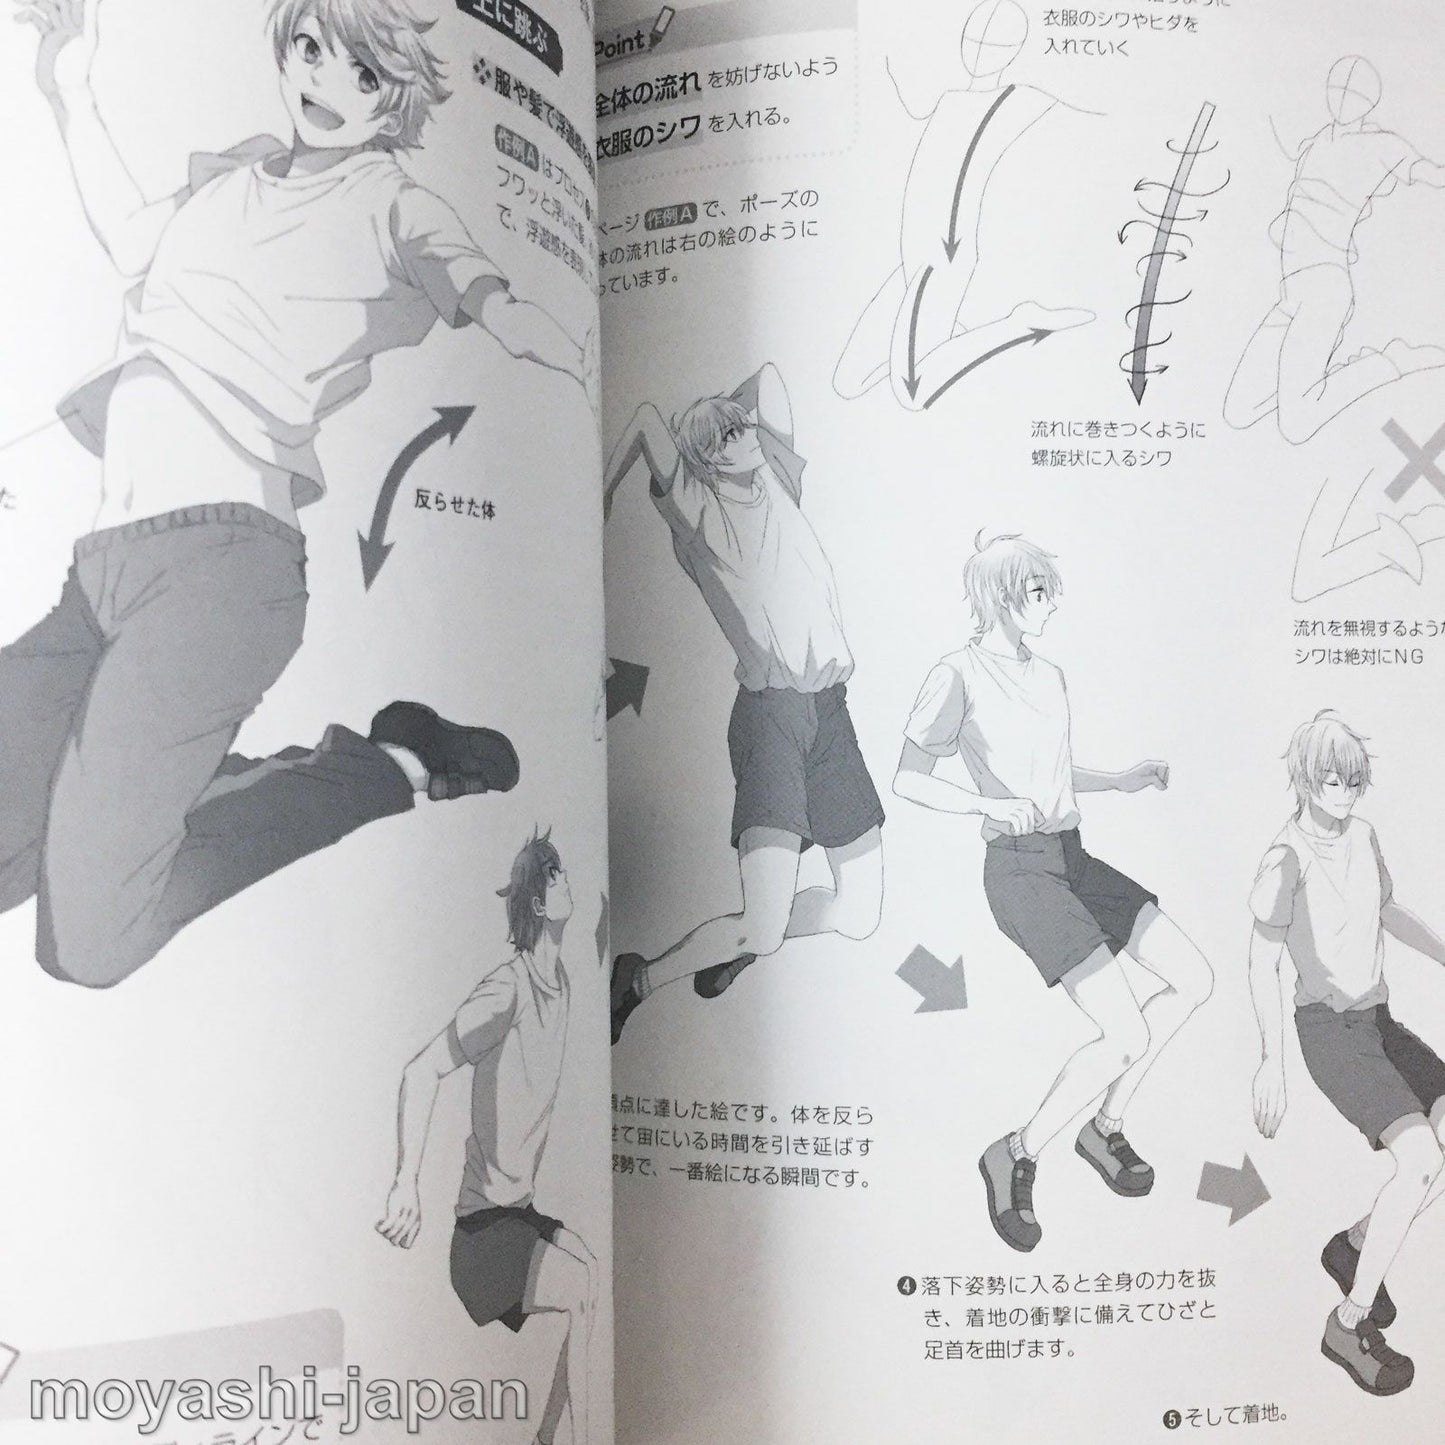 How To Draw Men's Moe Characters: Gestures and Poses